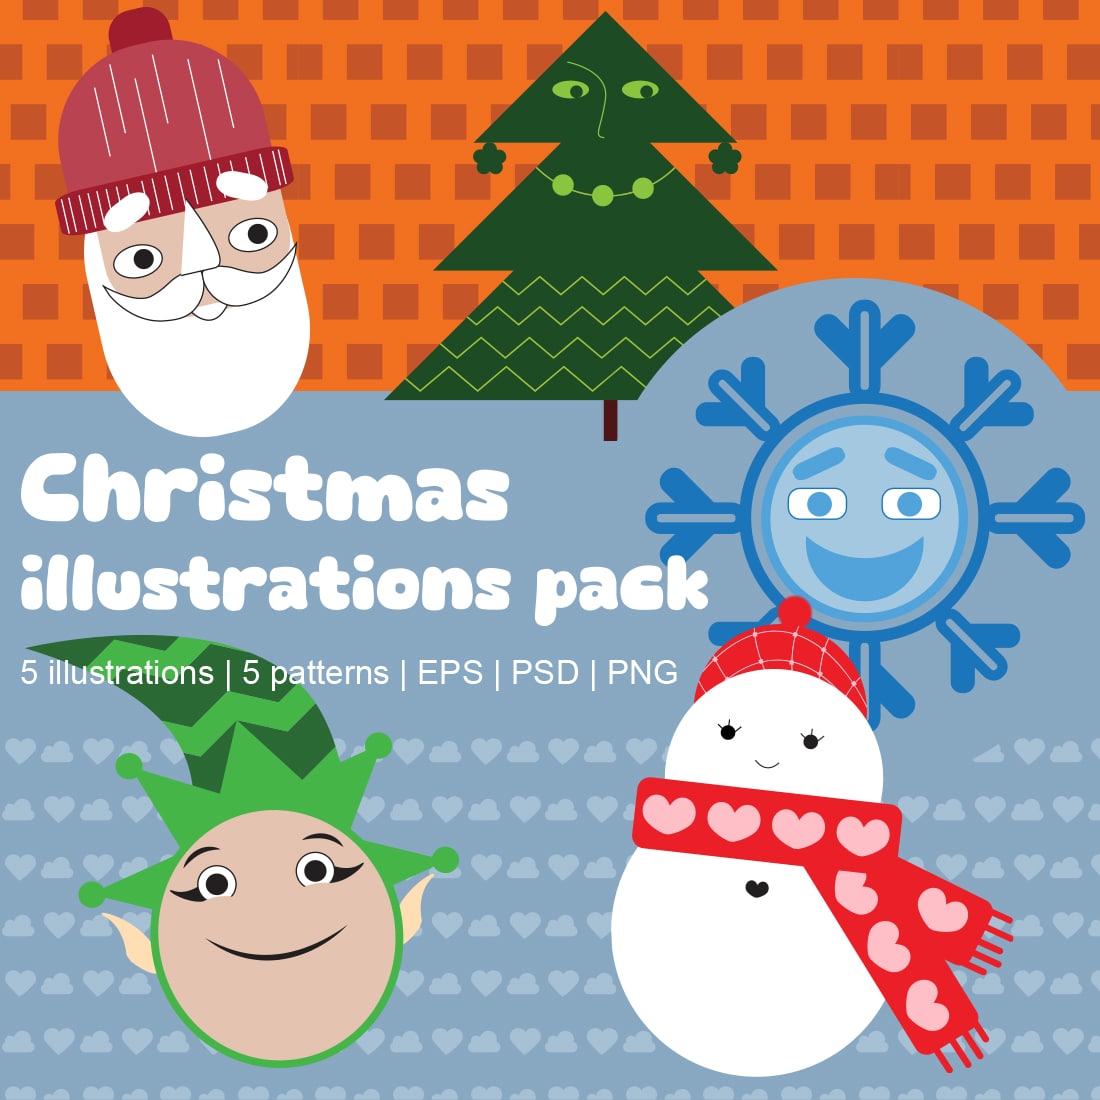 Cute modern style December Christmas characters Santa Claus Christmas Tree Elf, Snowflake, Snowman, colored background patterns Holiday Illustration clip art bundle, Cartoon Illustration cover image.